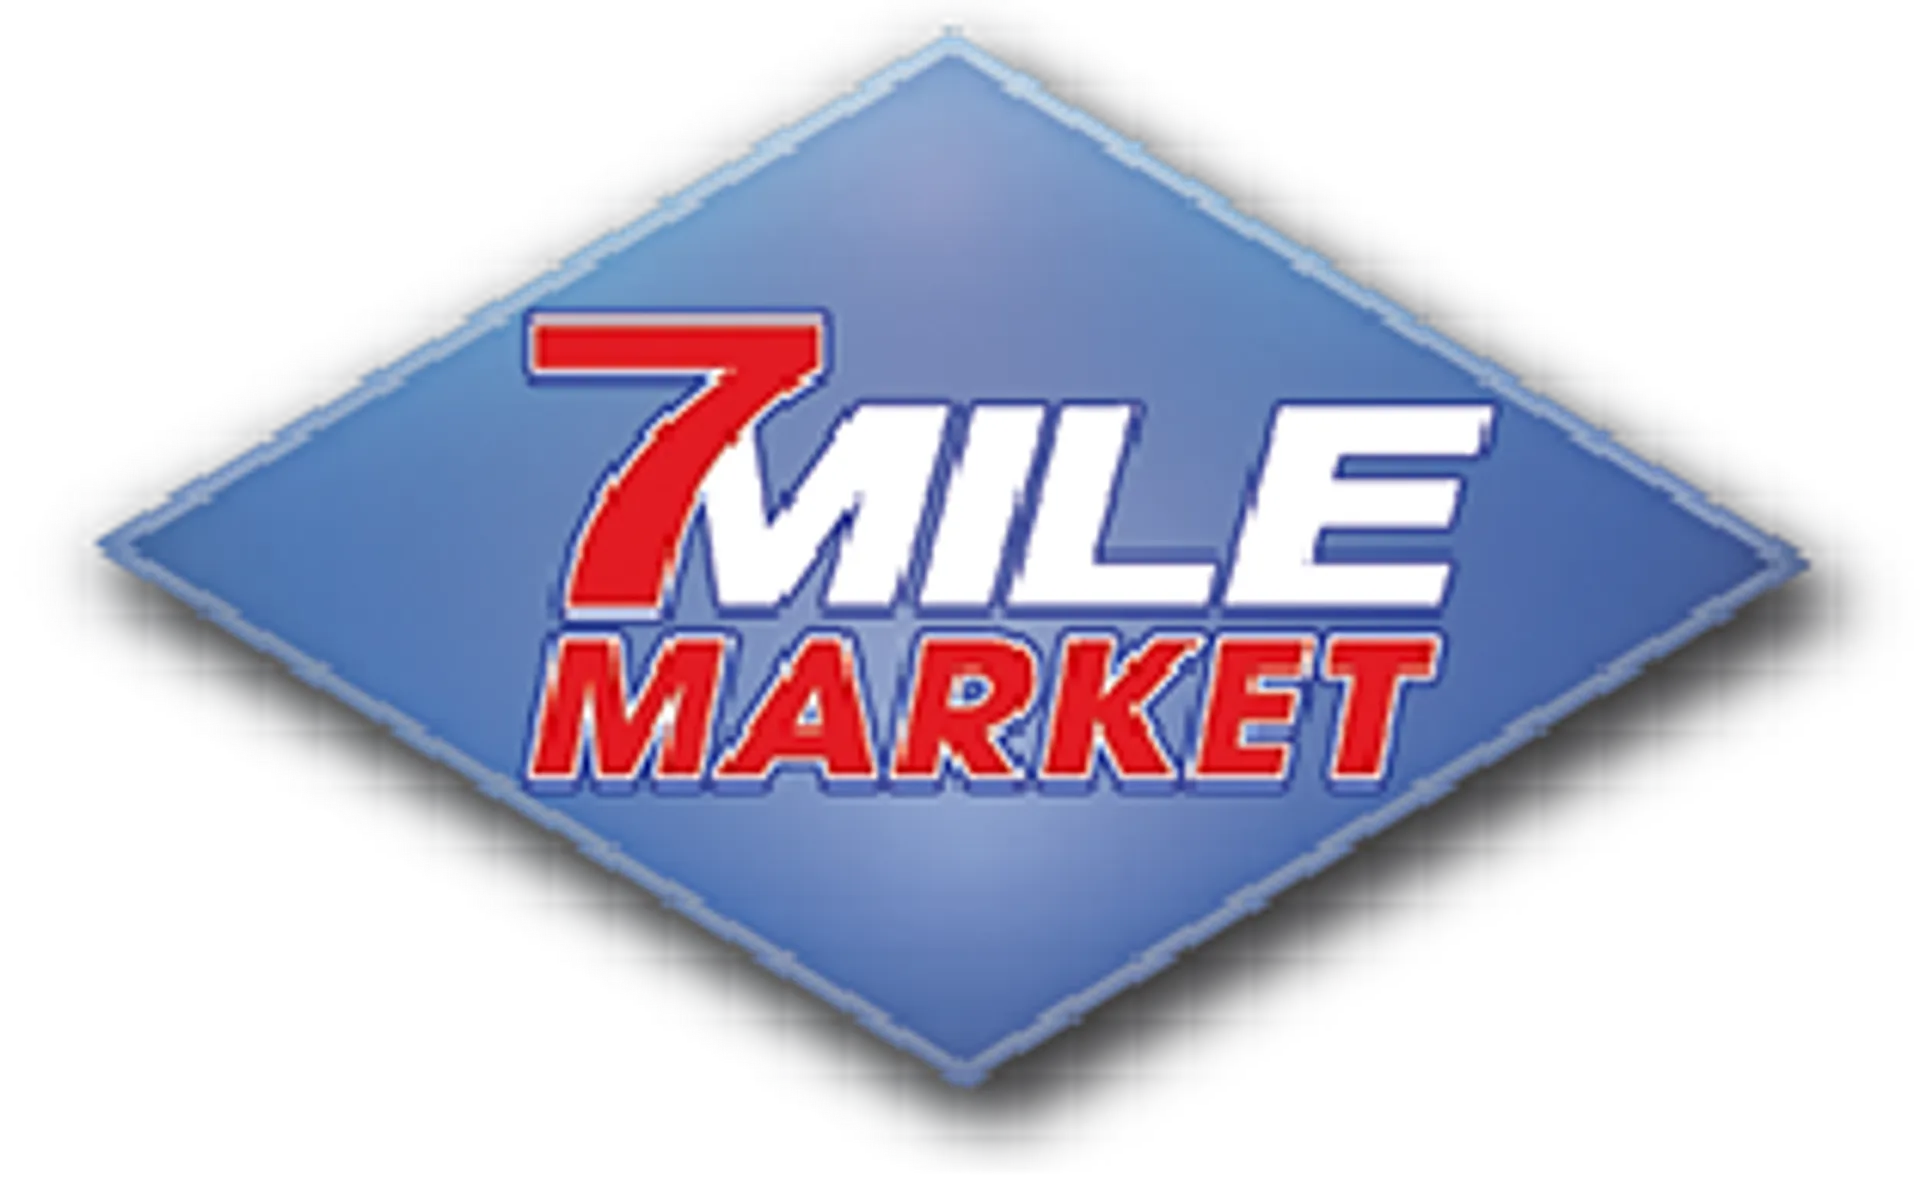 SEVEN MILE MARKET logo current weekly ad